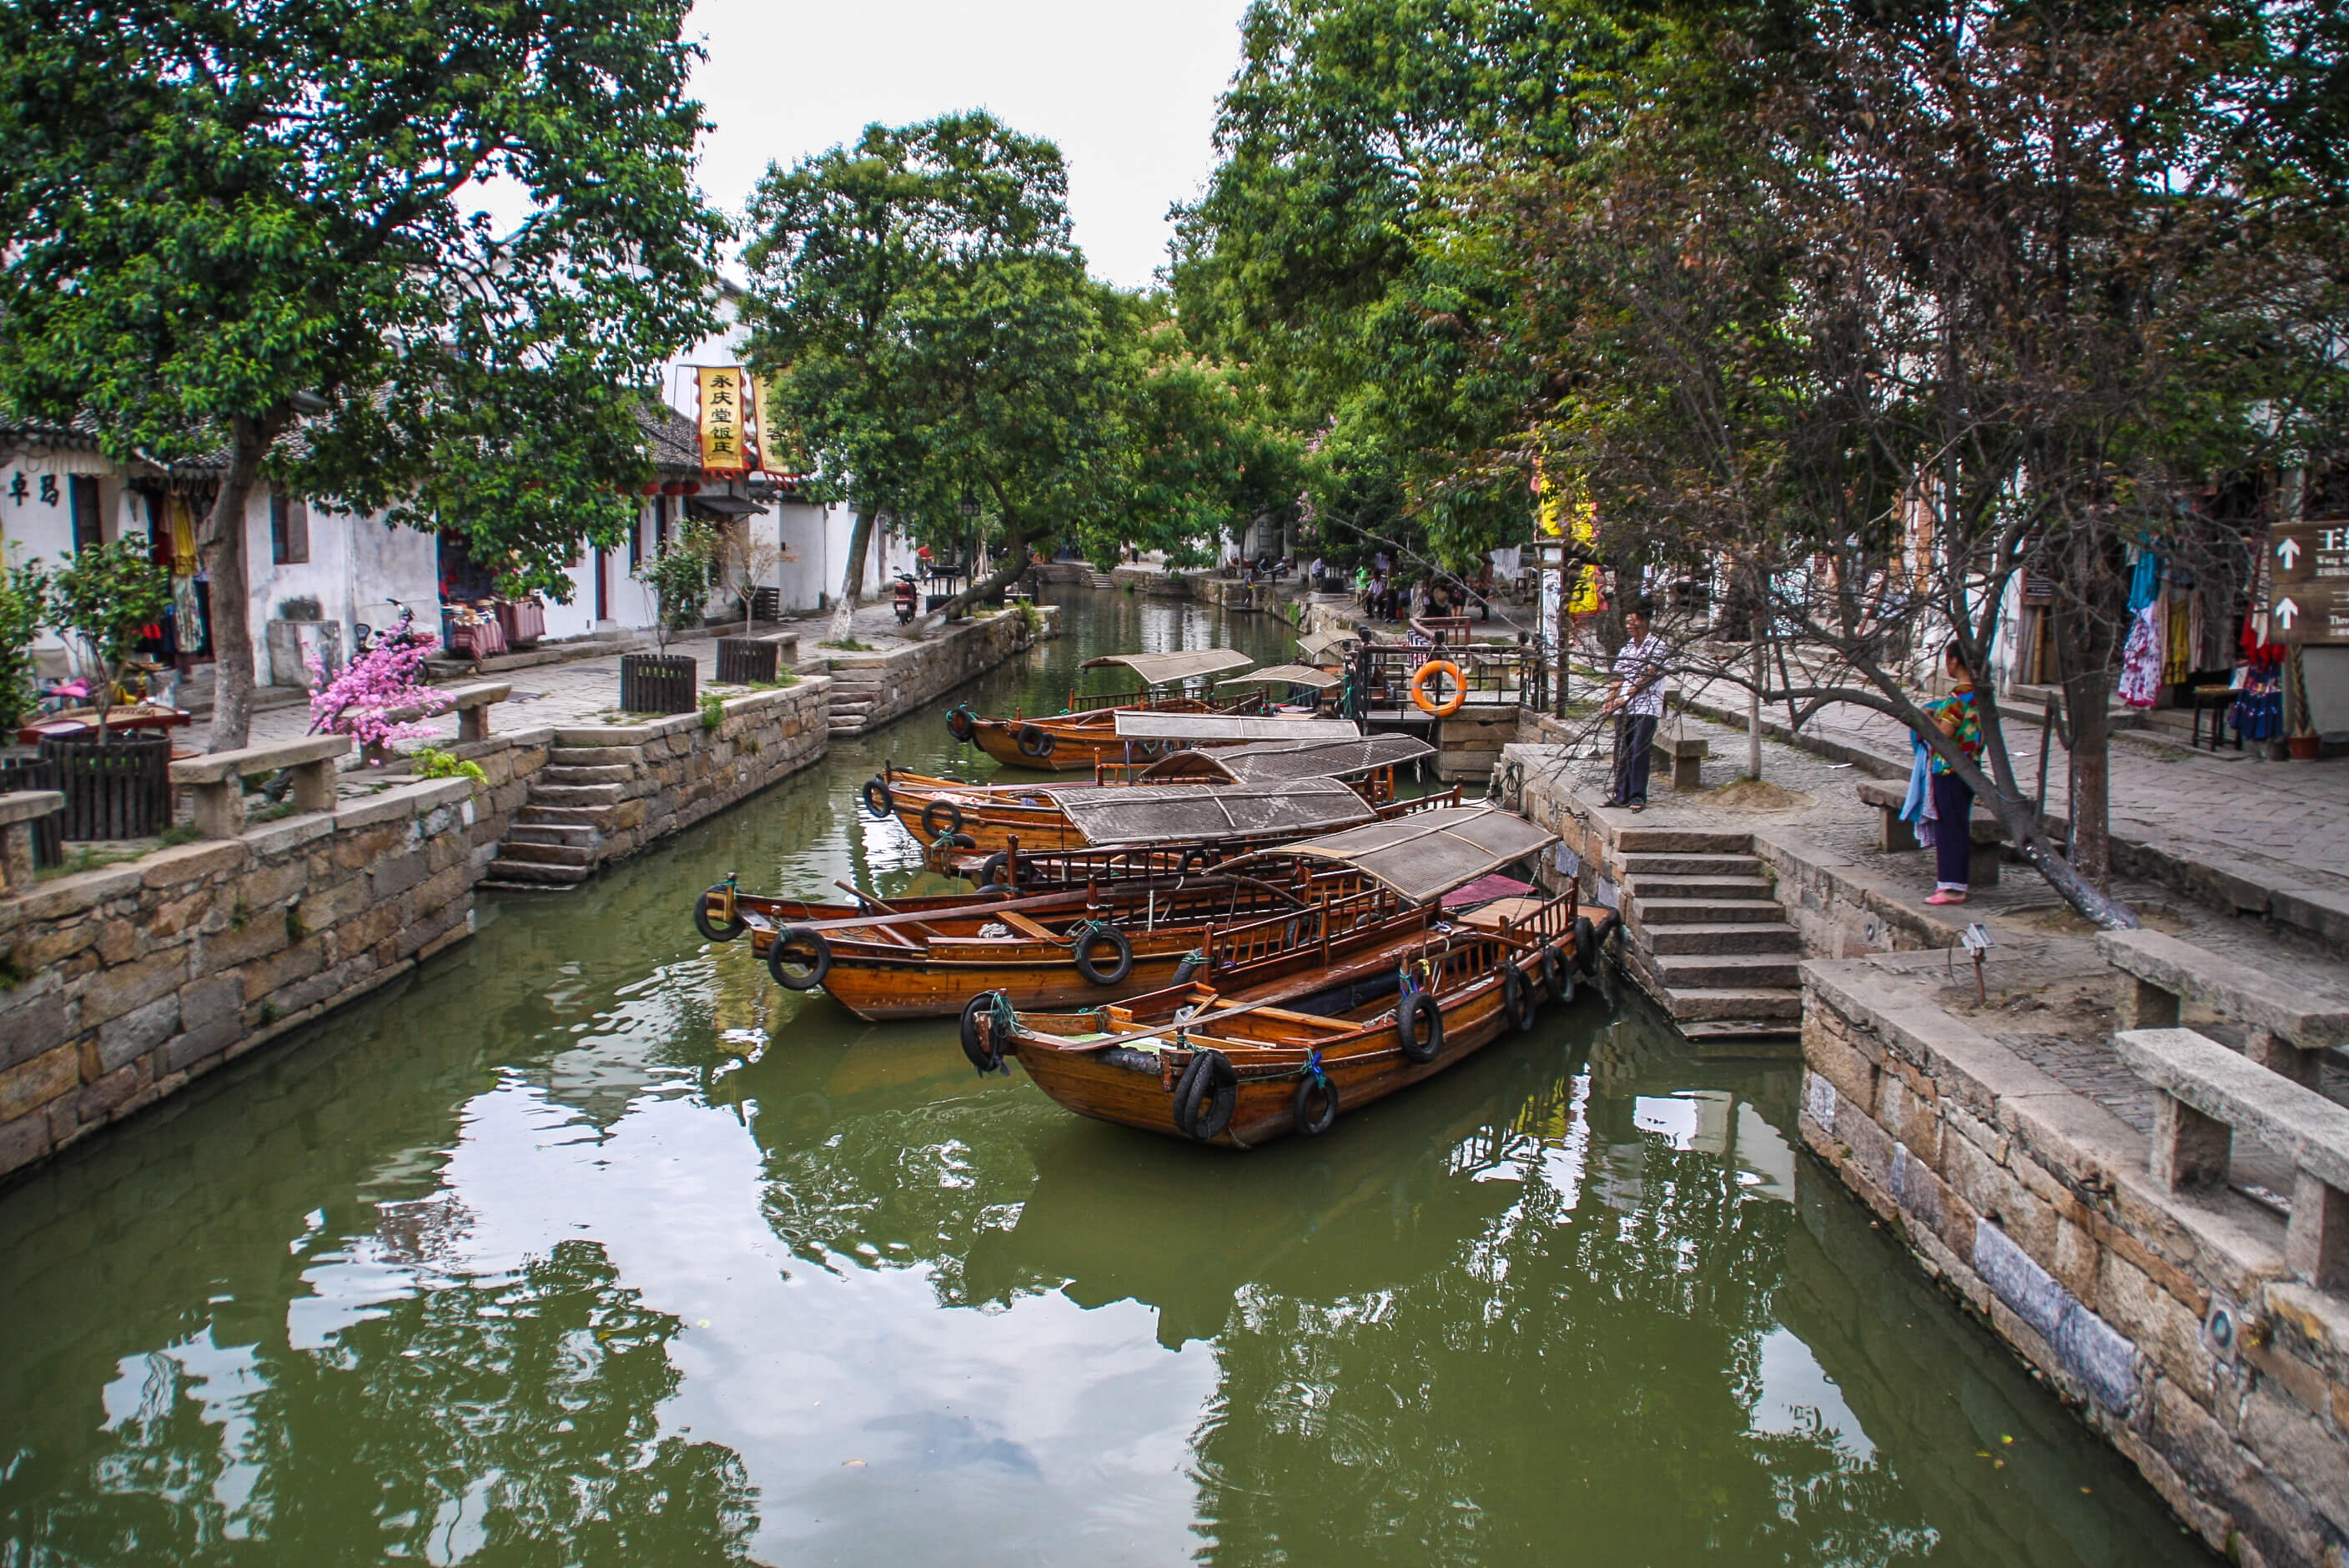 Suzhou_Tongli architecture and gardens_architecture on the road